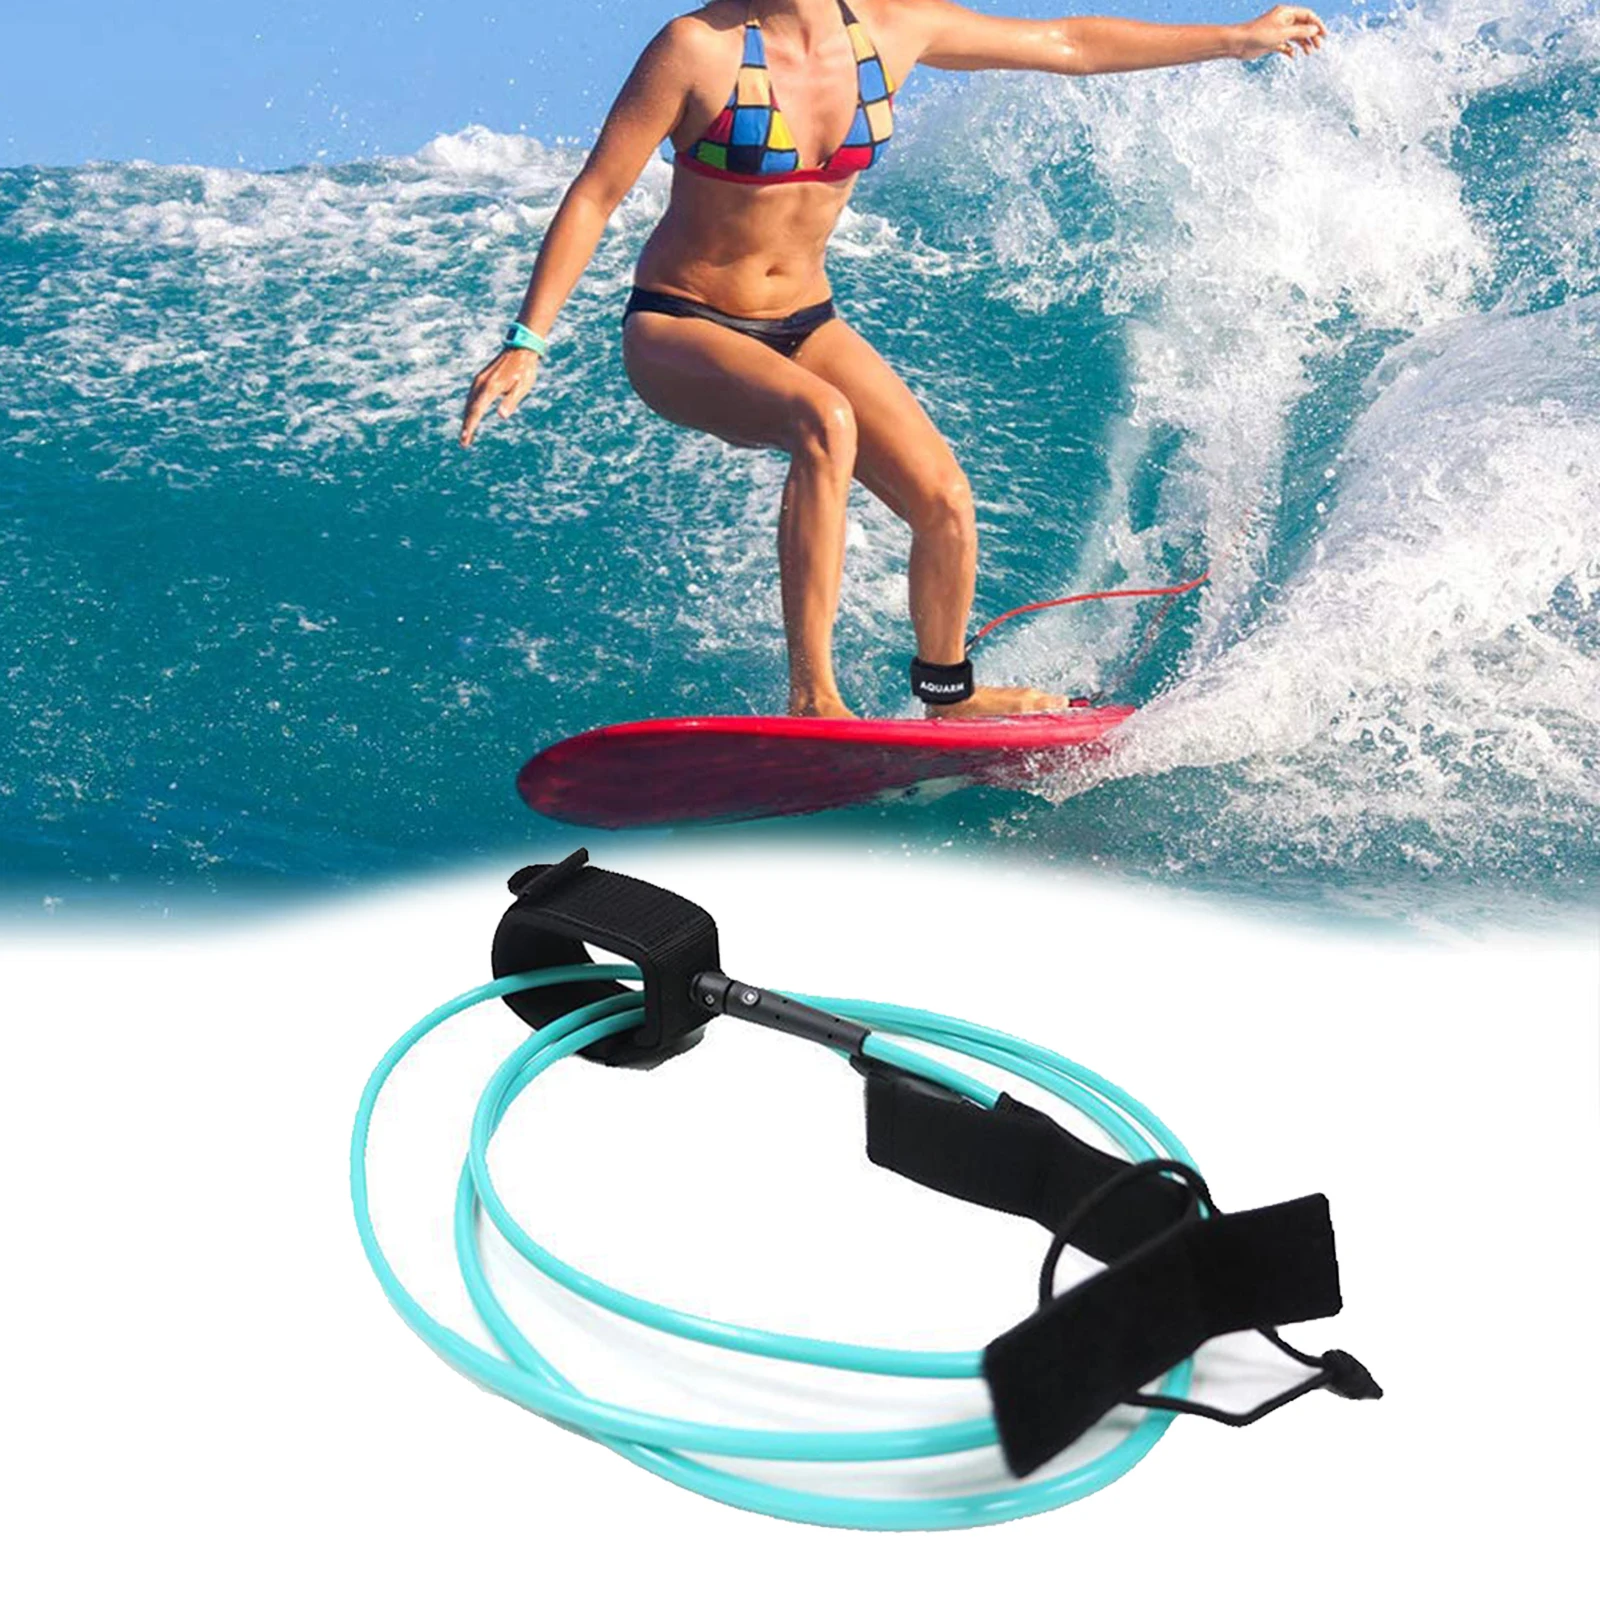 Surfboard Leash Foot Rope Stand Up Paddle Board Ankle Leash Ankle Cuff Surf Leash for Surfing Safety